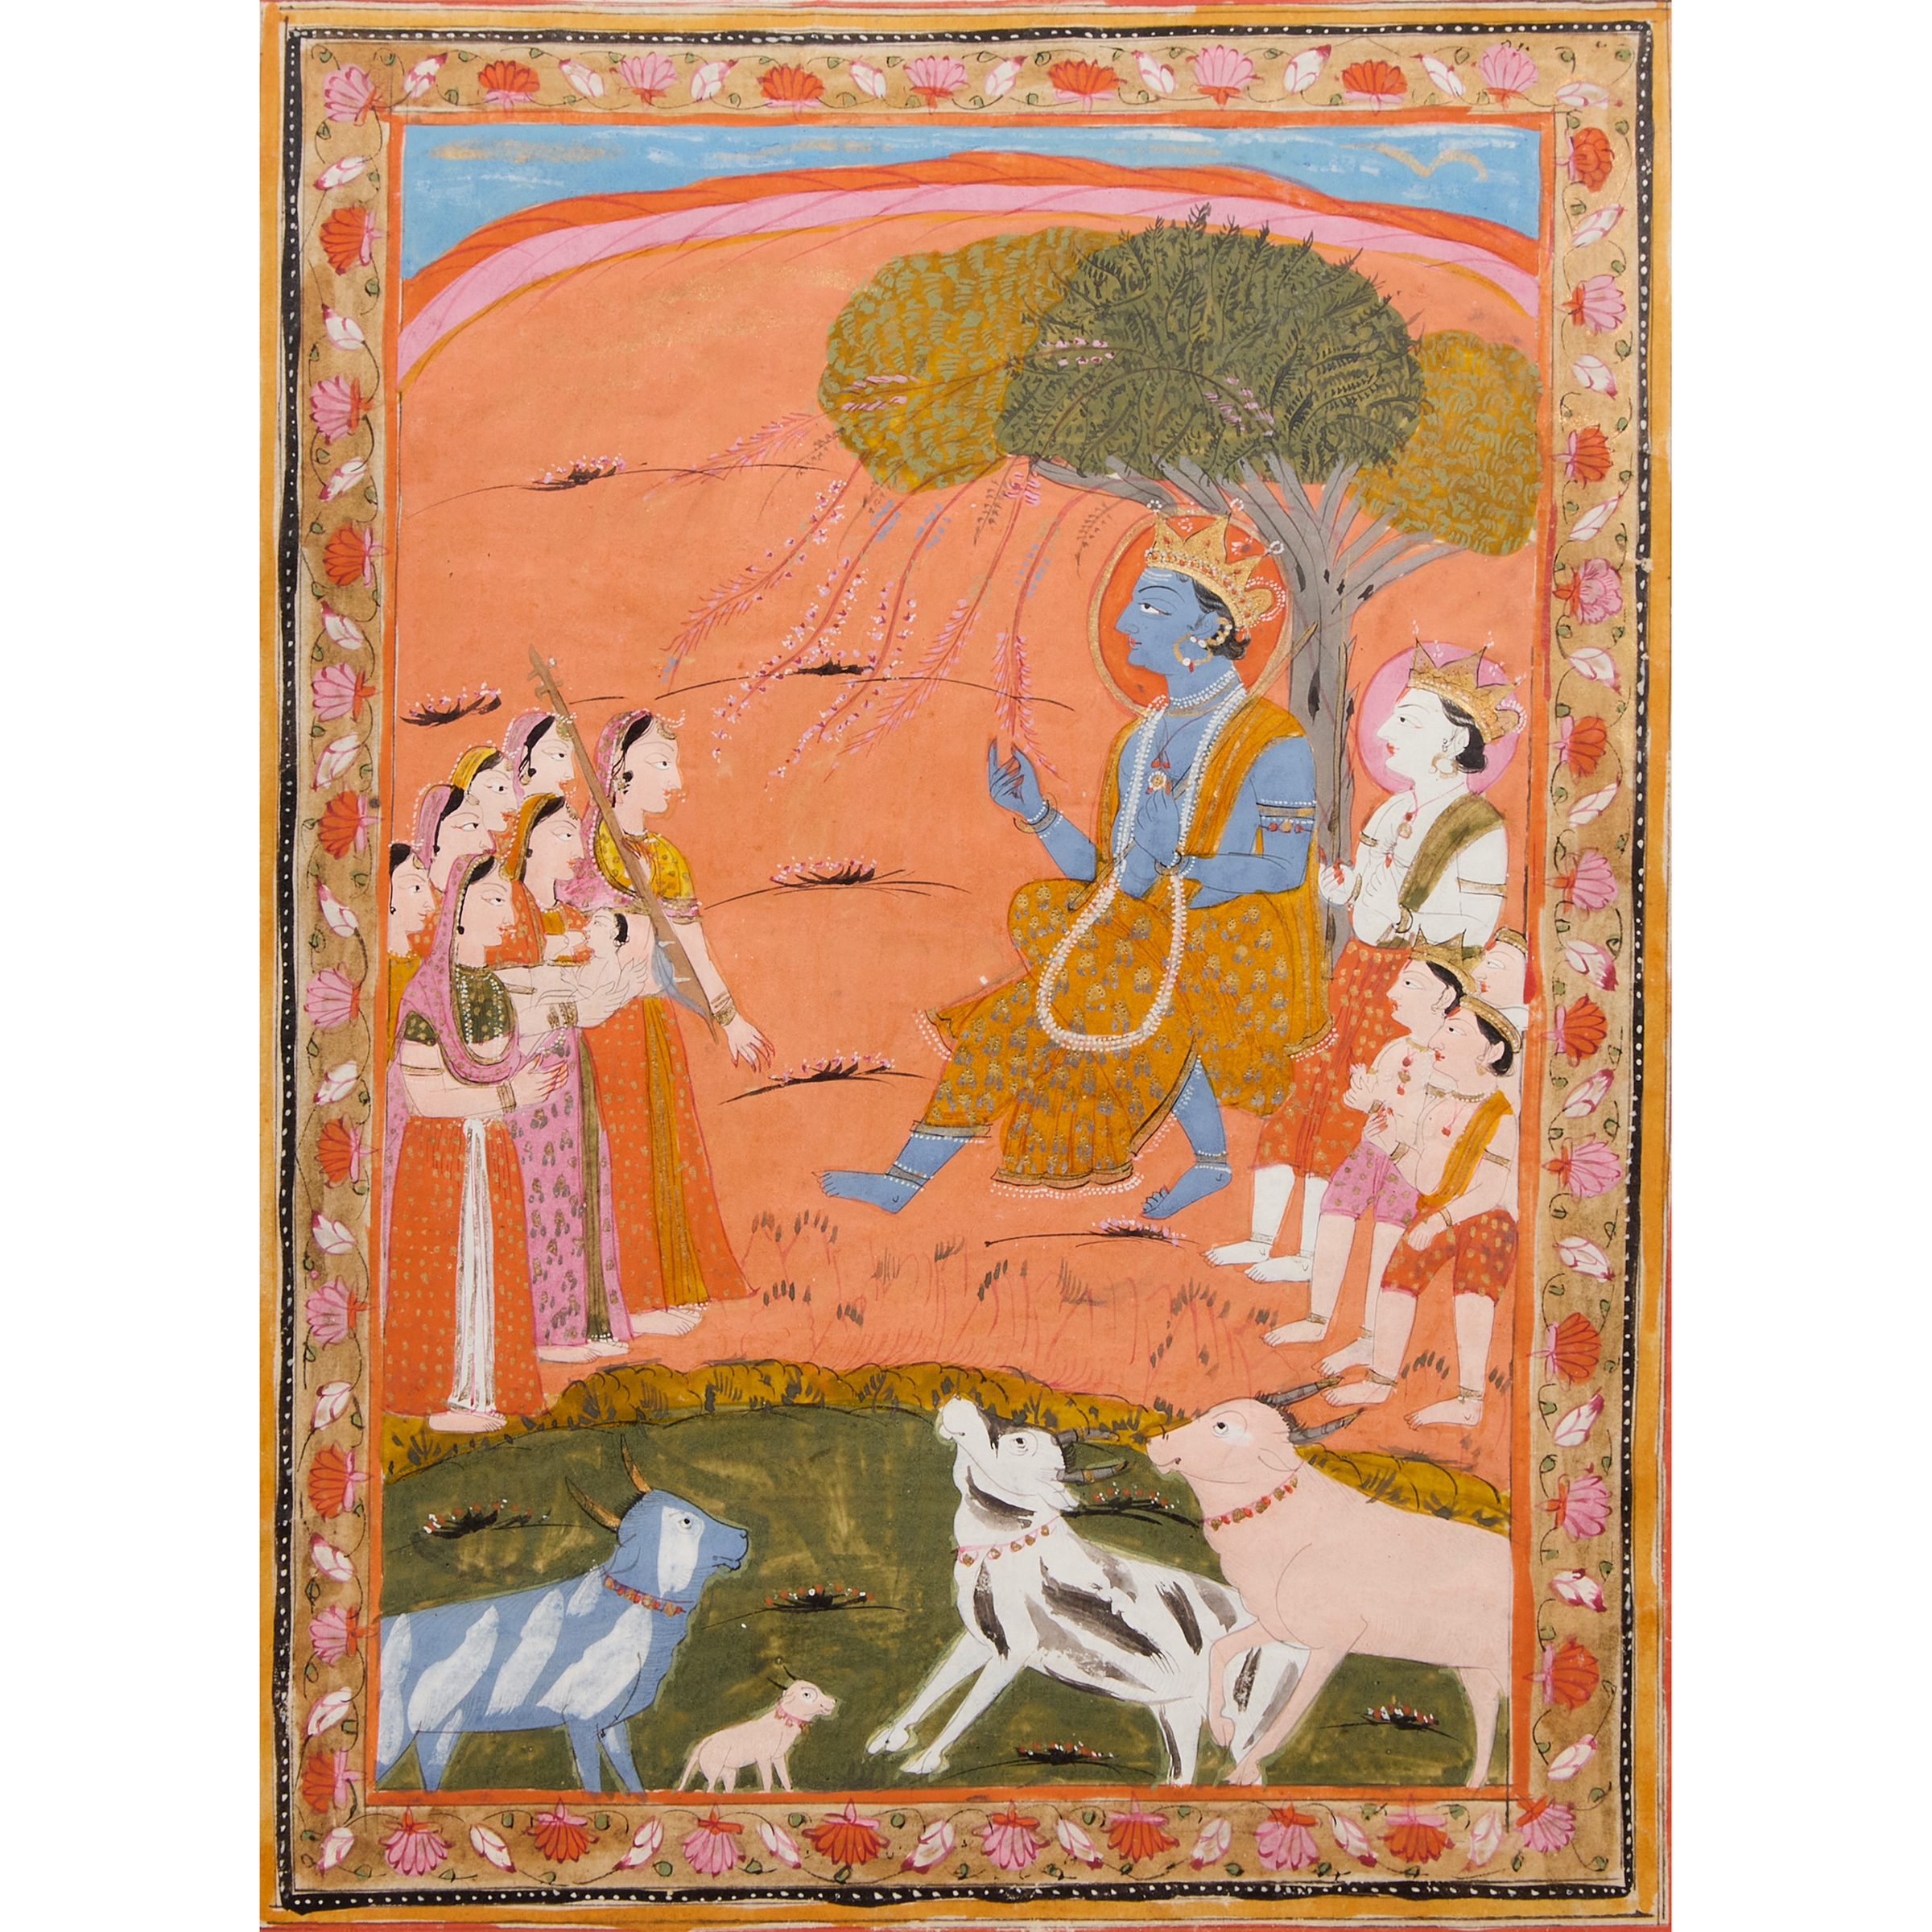 A Painting from a Ragamala Series, 19th Century - Rajasthan School, 19th Century